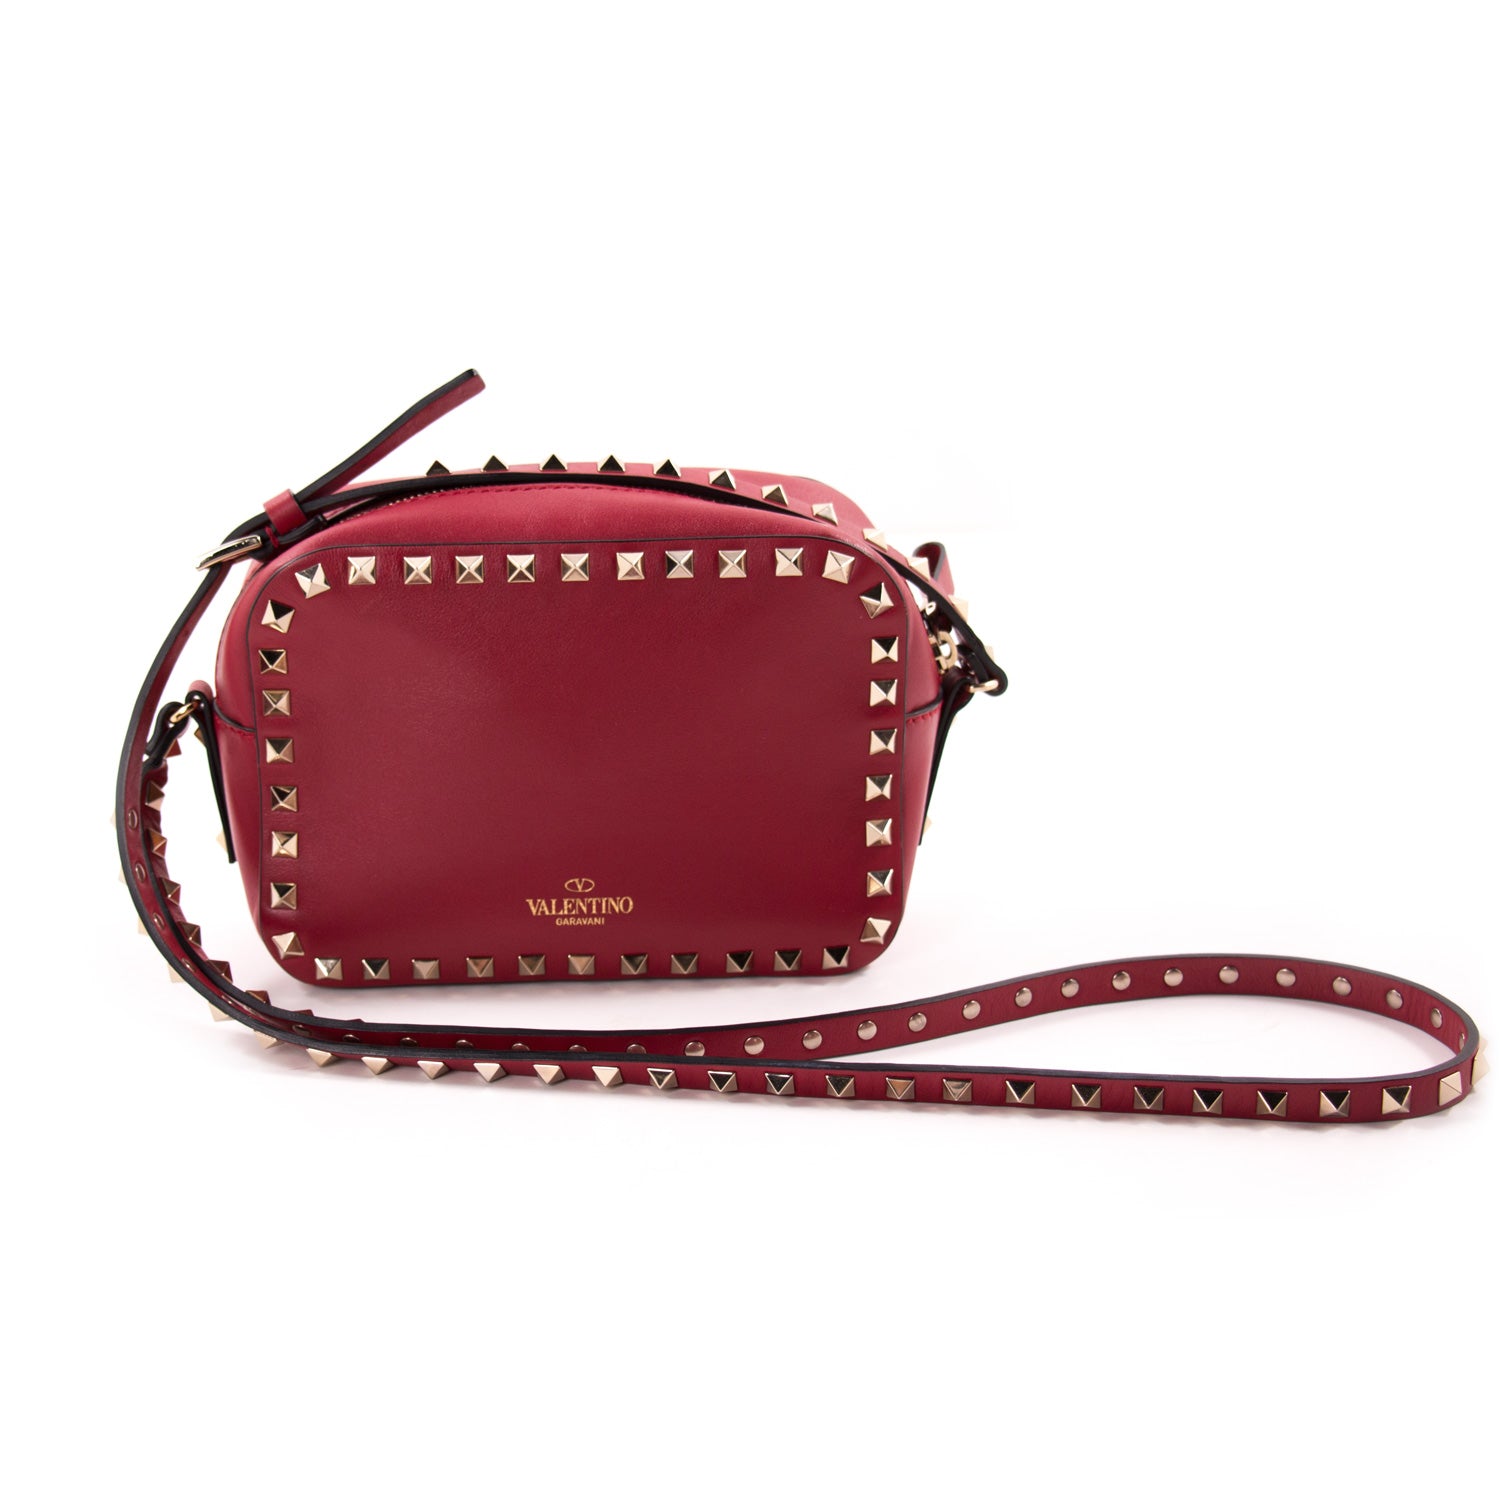 authentic Rockstud Camera Bag at revogue for just USD 969.00